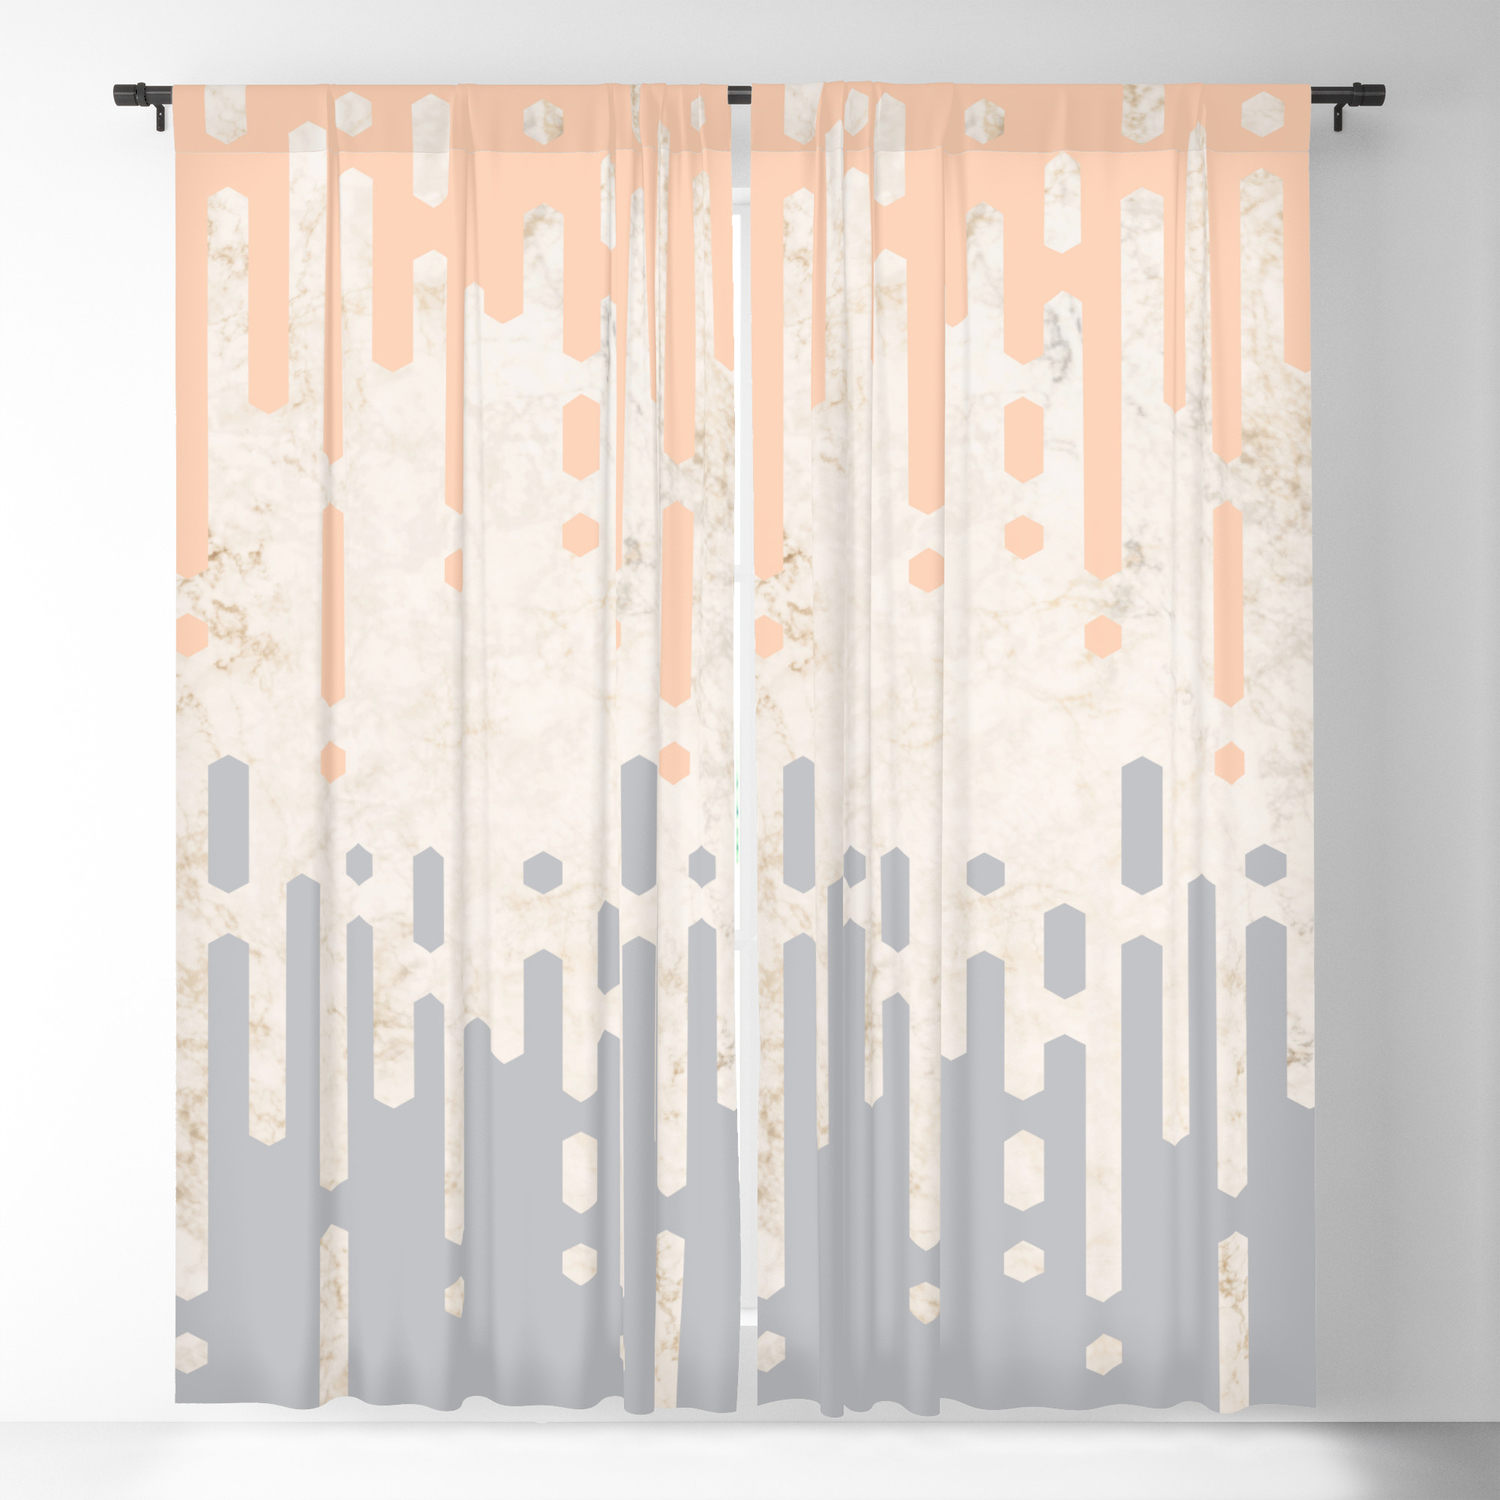 Peach And Grey Shower Curtain Free, Peach And Grey Shower Curtain